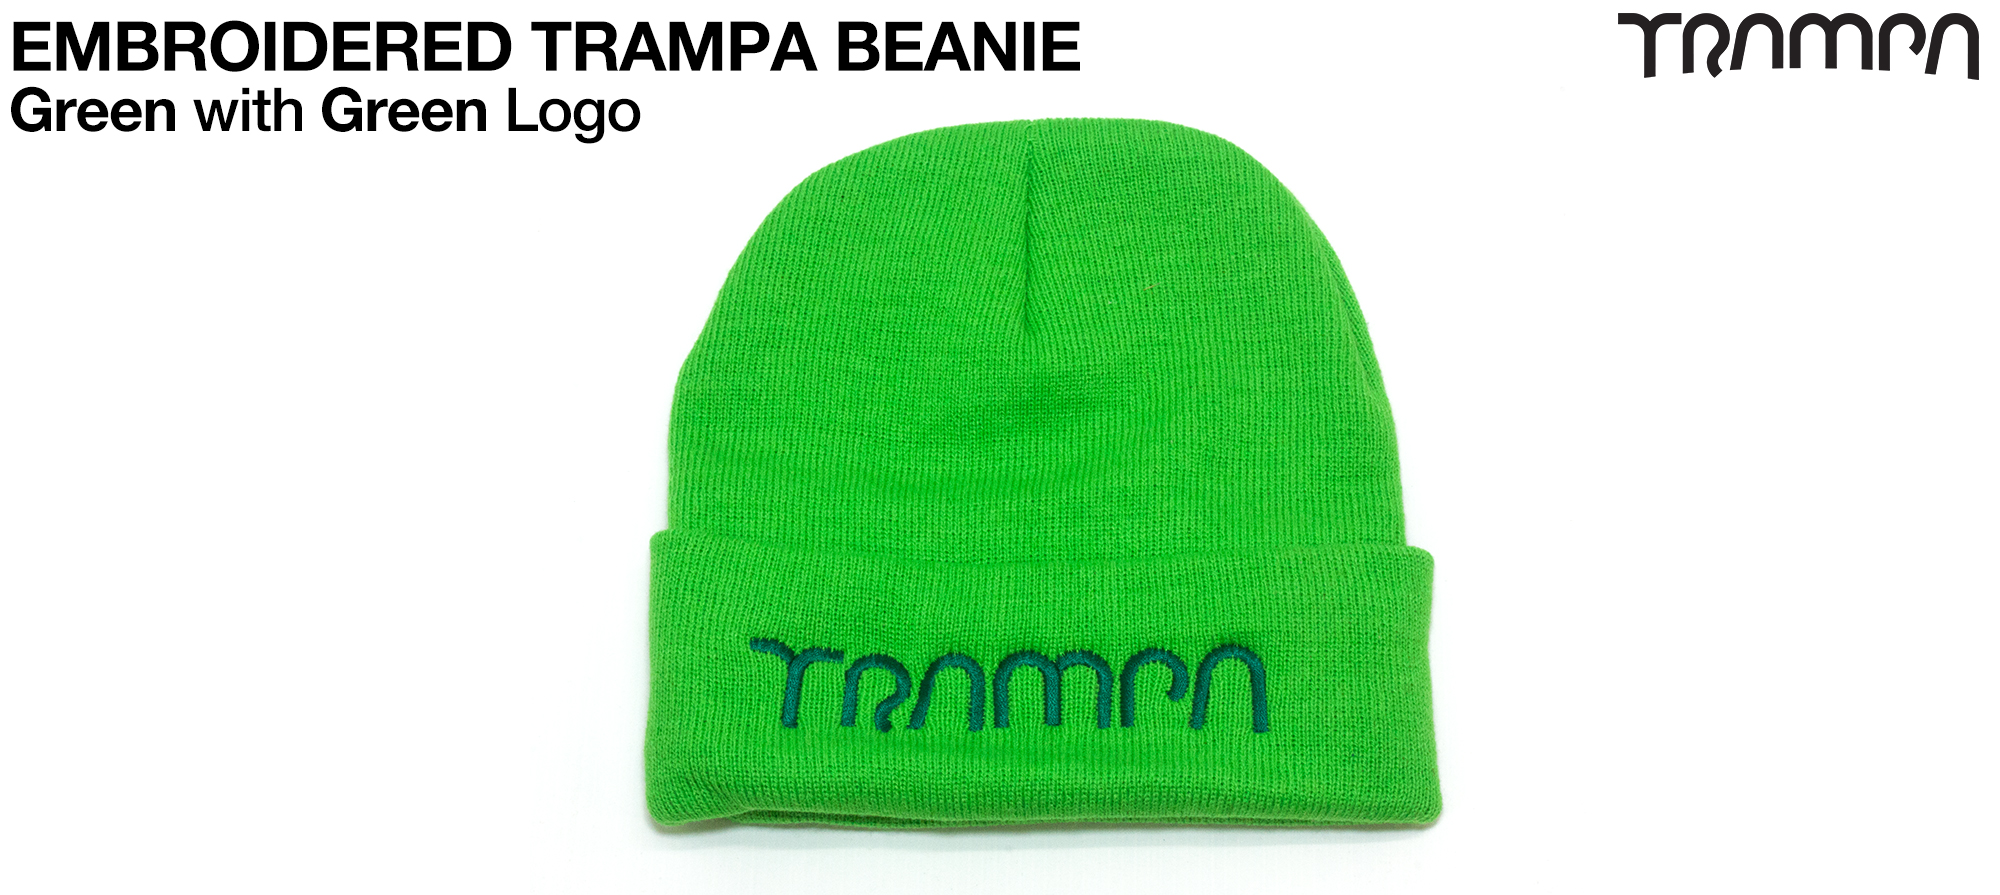 GREEN Beanie with EMBROIDERED TRAMPA logo  (£12.50)